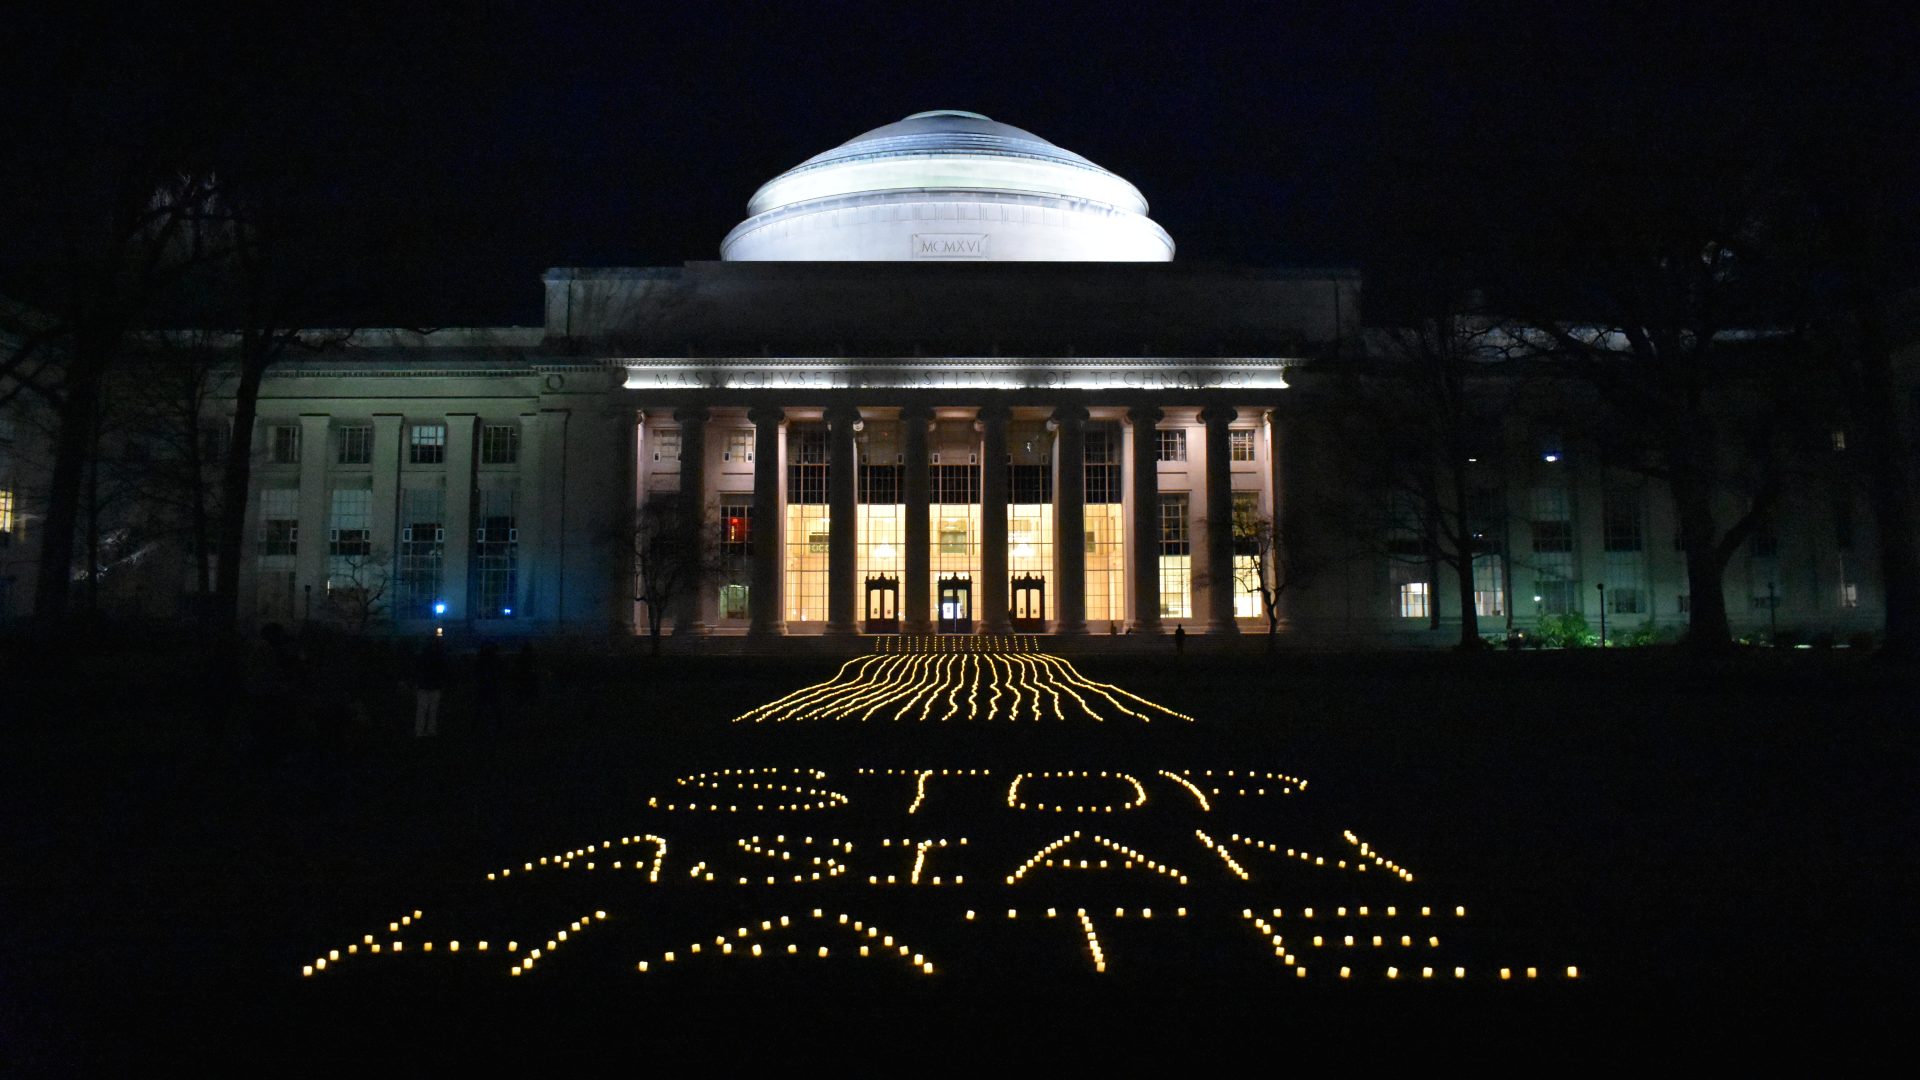 3795 battery powered candles laid out on Killian Court at MIT that spell out "STOP ASIAN HATE".